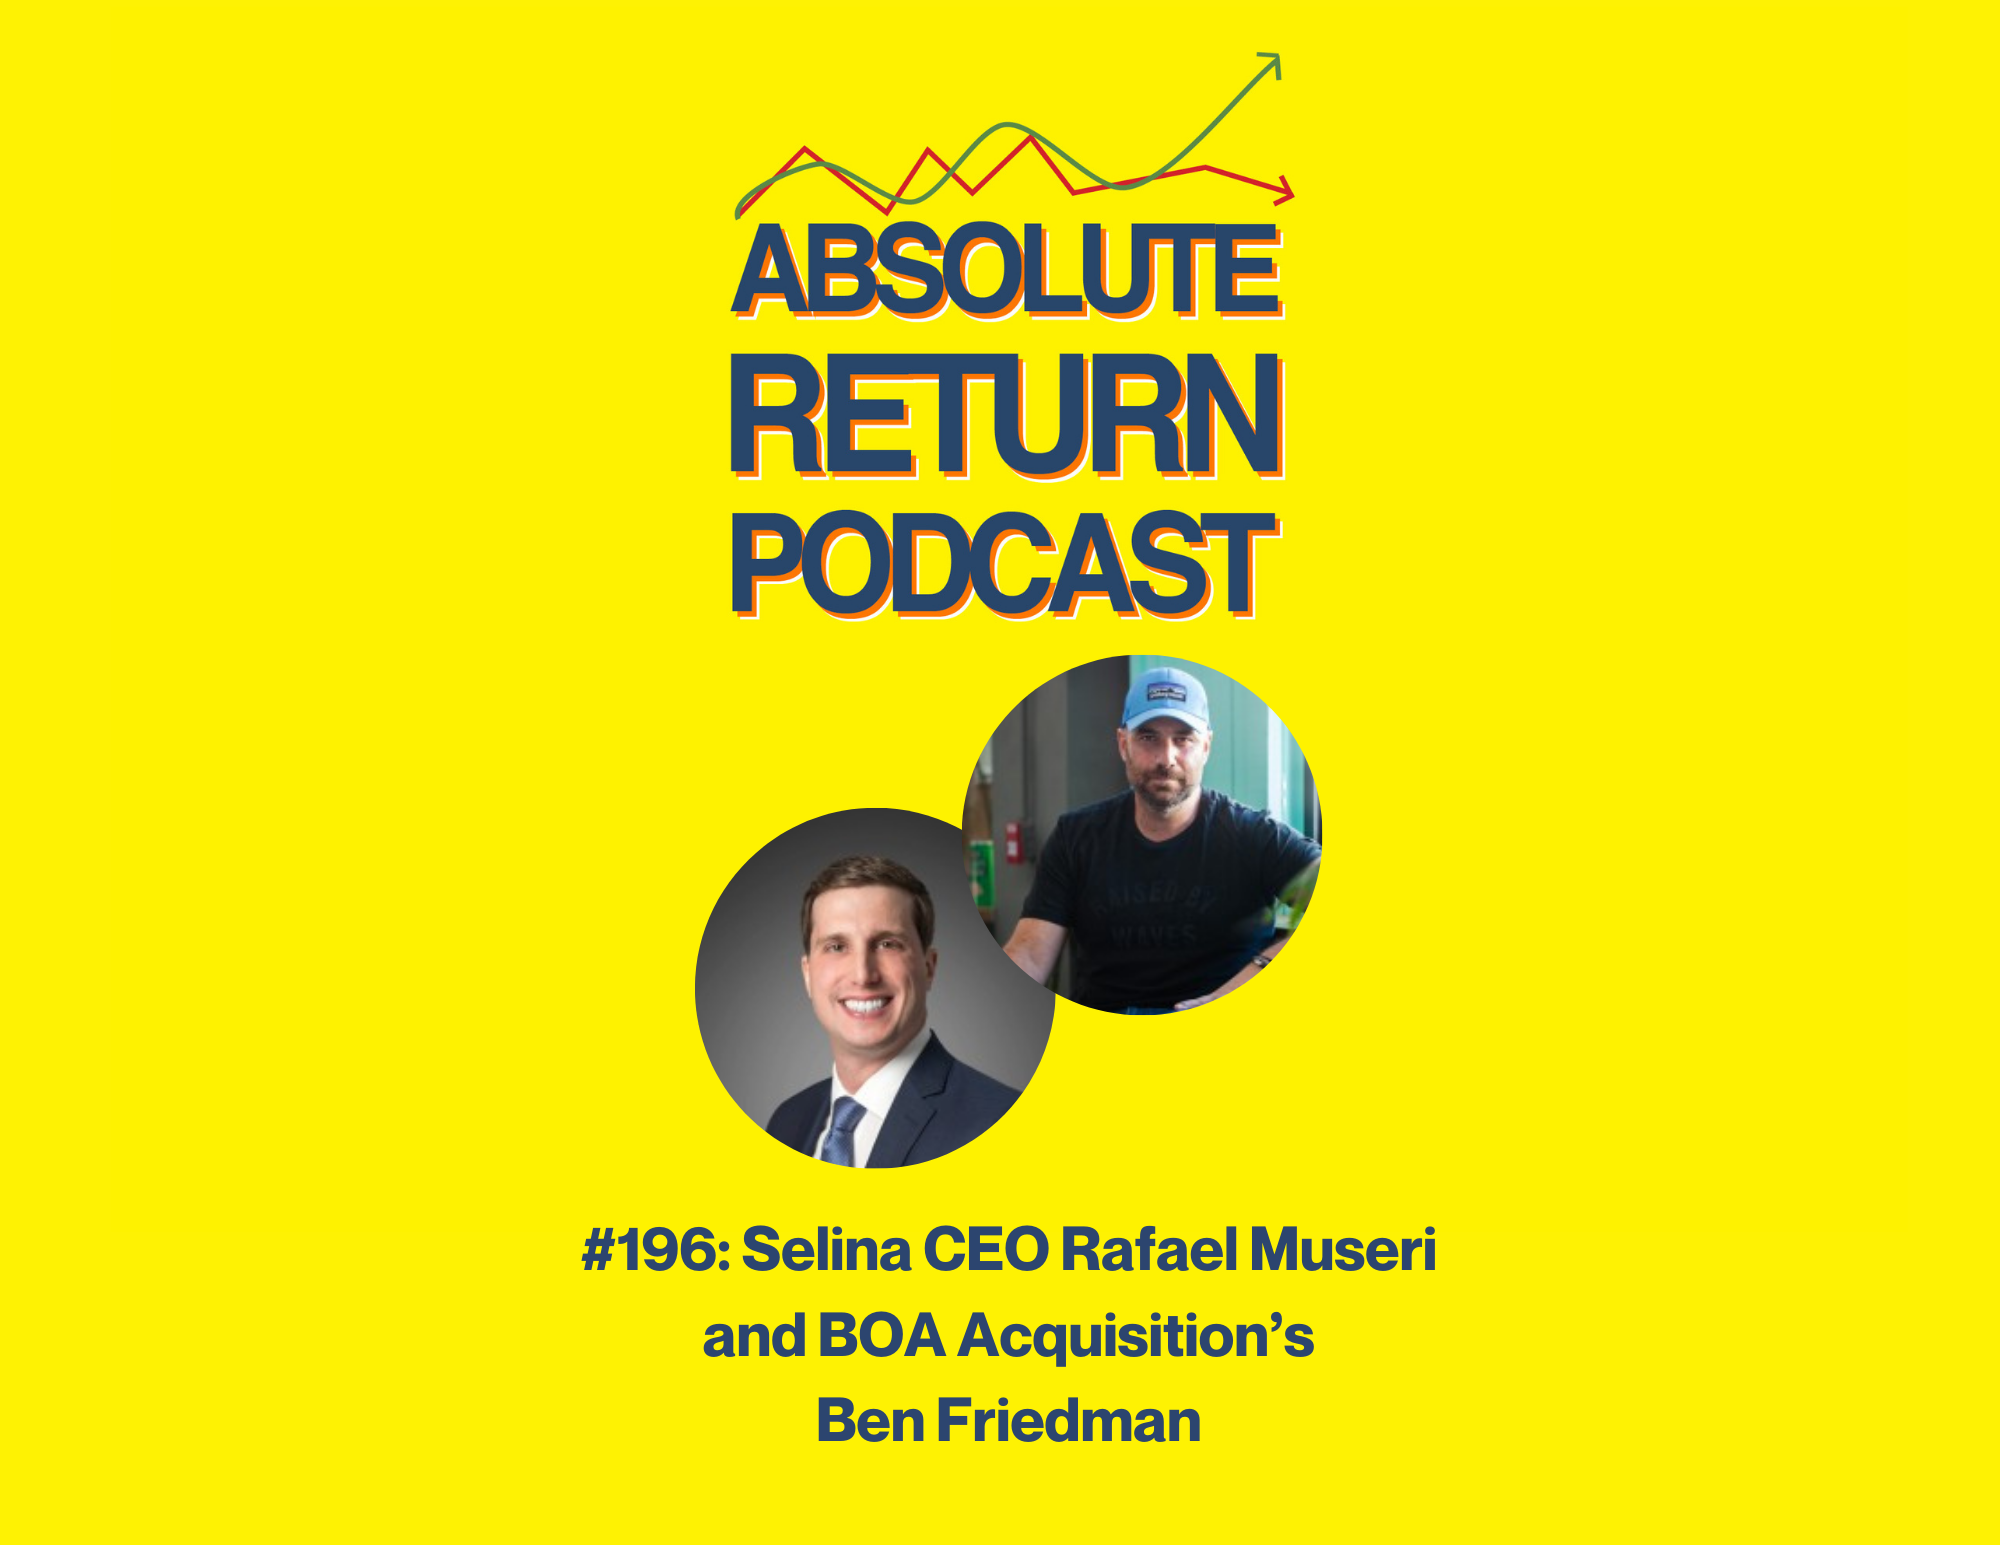 Absolute Return Podcast #196: Leadership Chat: Selina CEO Rafael Museri and BOA Acquisition’s Ben Friedman